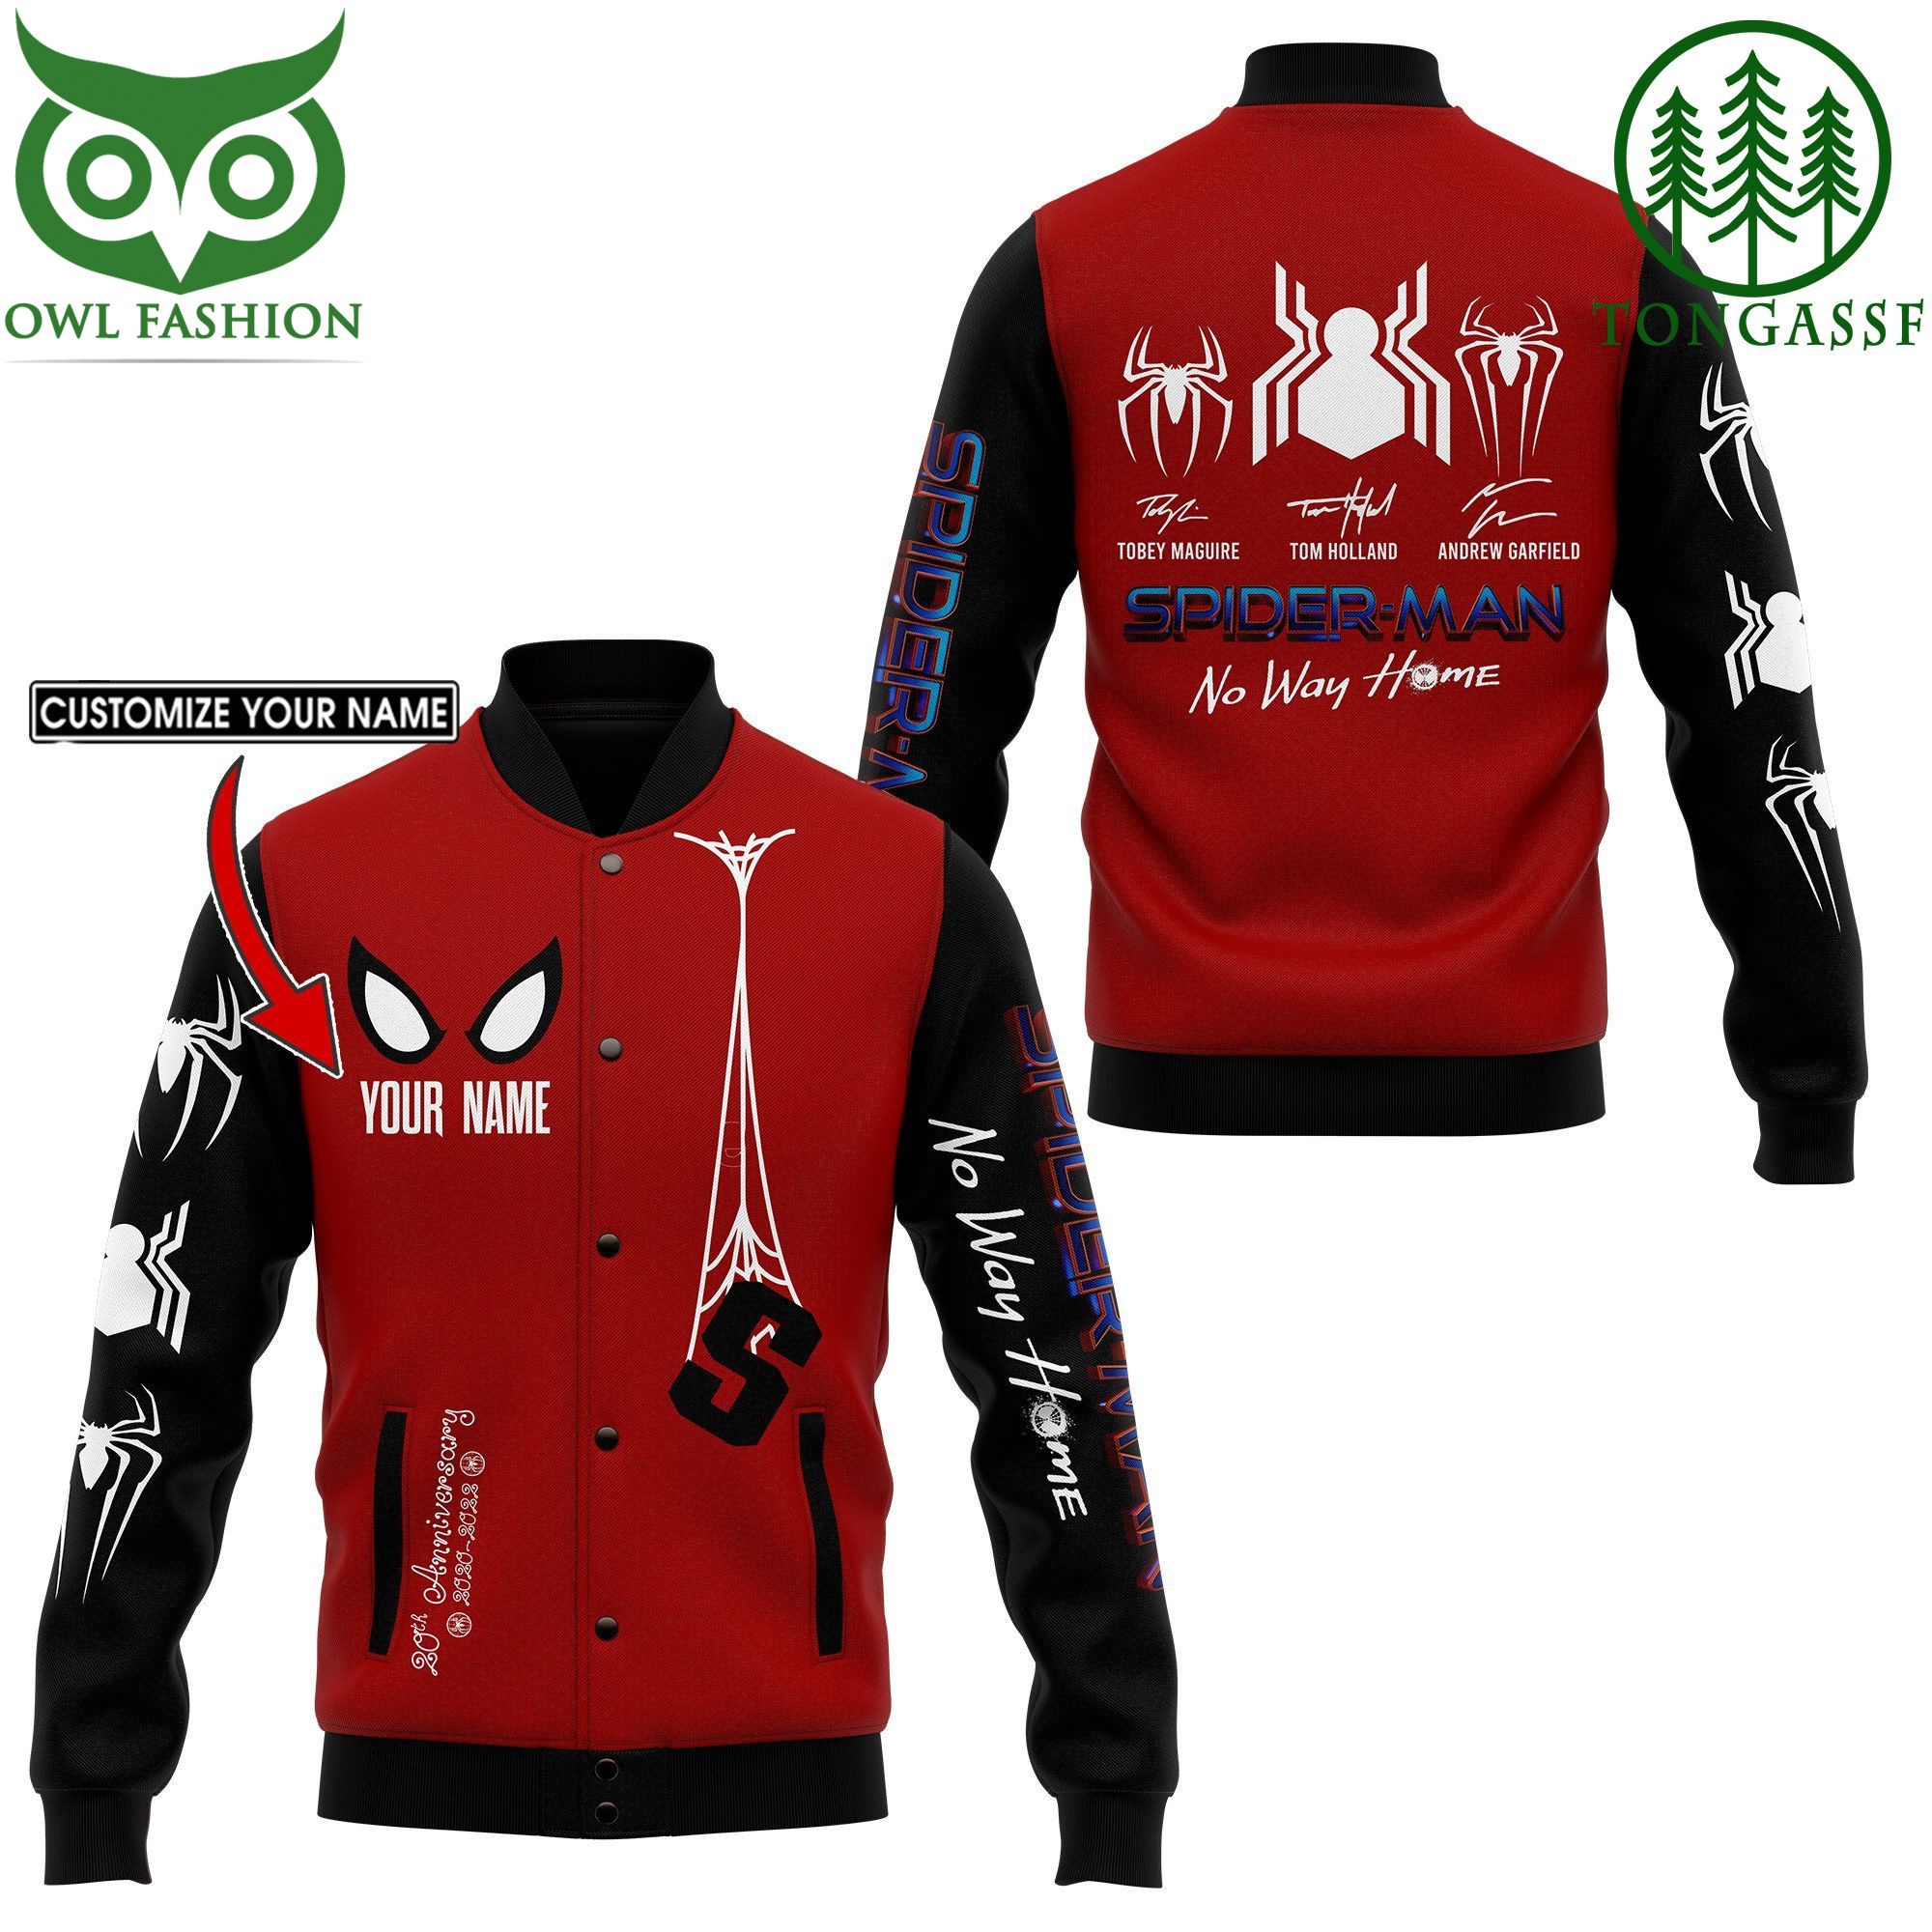 Spiderman No way home personalized bomber jacket